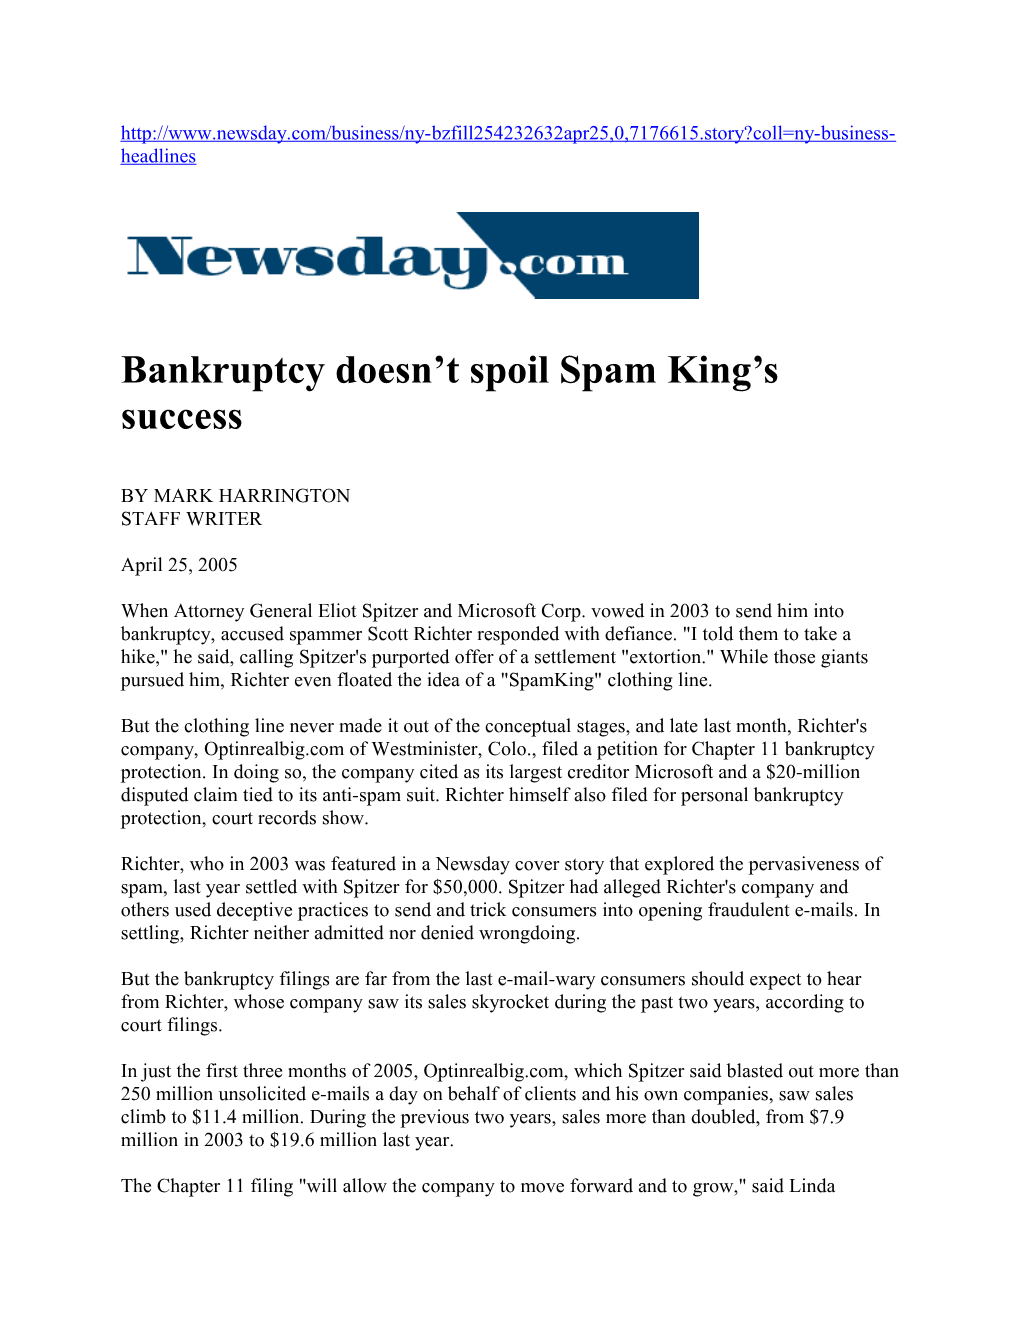 Bankruptcy Doesn't Spoil Spam King's Success - Newsday